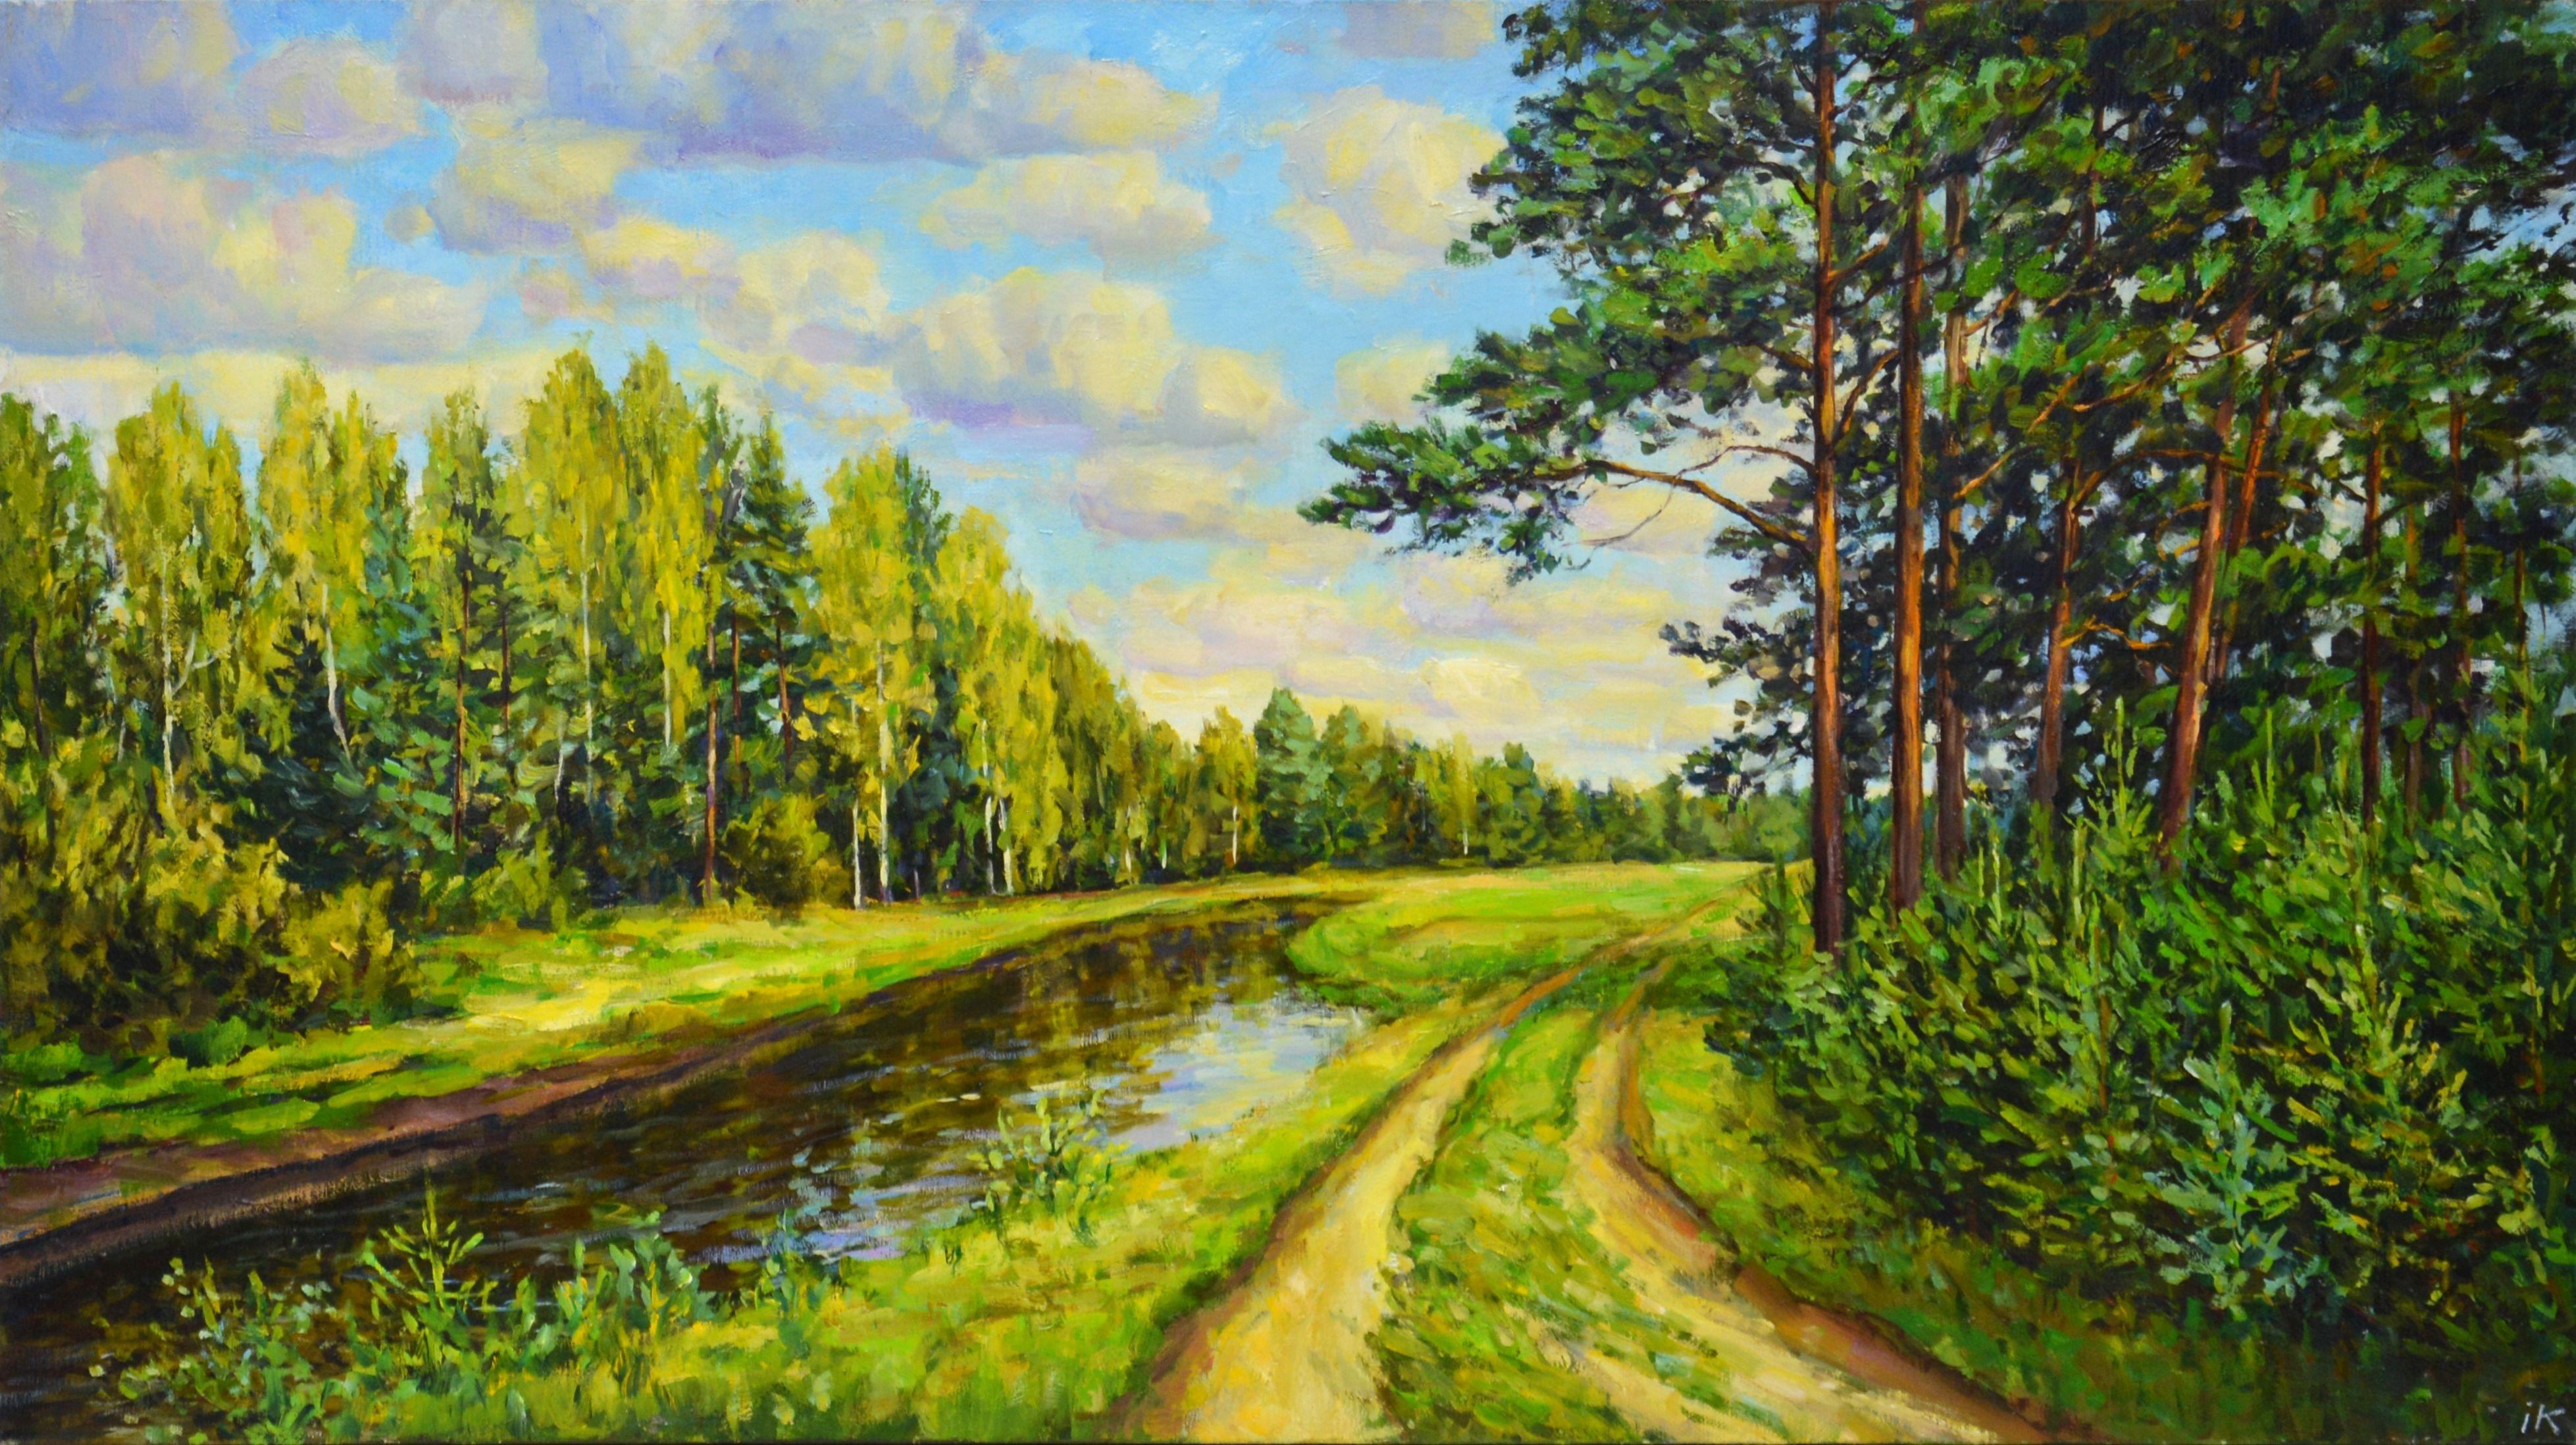 Summer landscape: forest, trees, pines, birches, river, grass, sky, road. Impressionism. A rich palette of summer colors, a premonition of the coming golden autumn evoke a feeling of love and gratitude to nature. The picture has good spatial